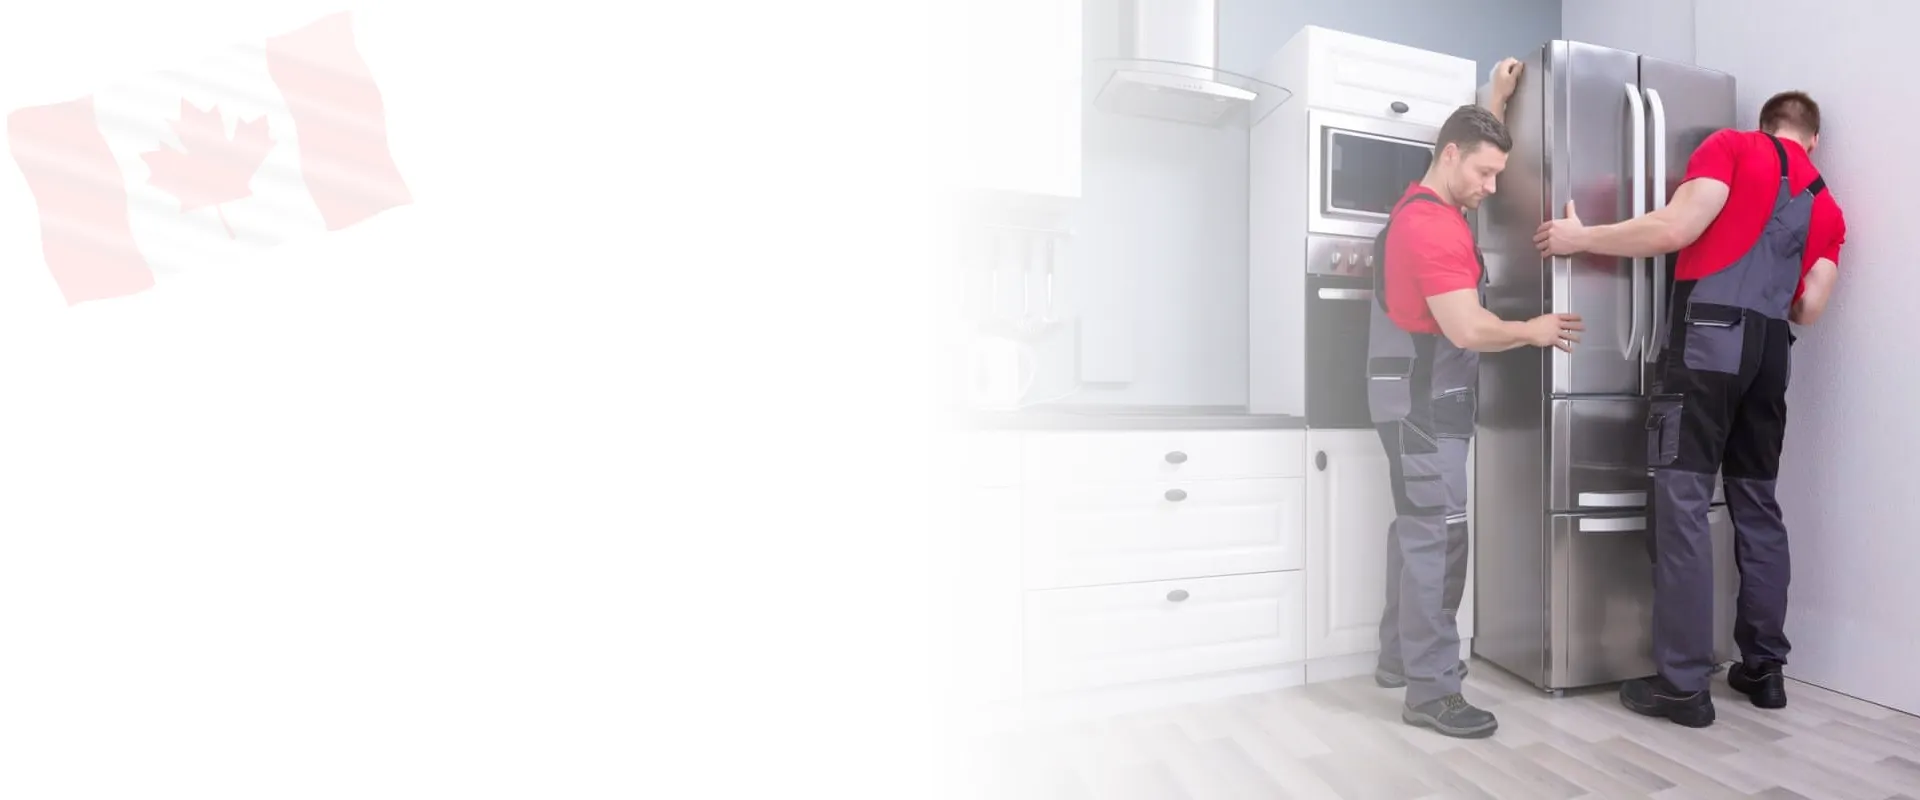 London Ontario's Appliance Experts: Dishwasher Installation and Samsung Appliance Repair